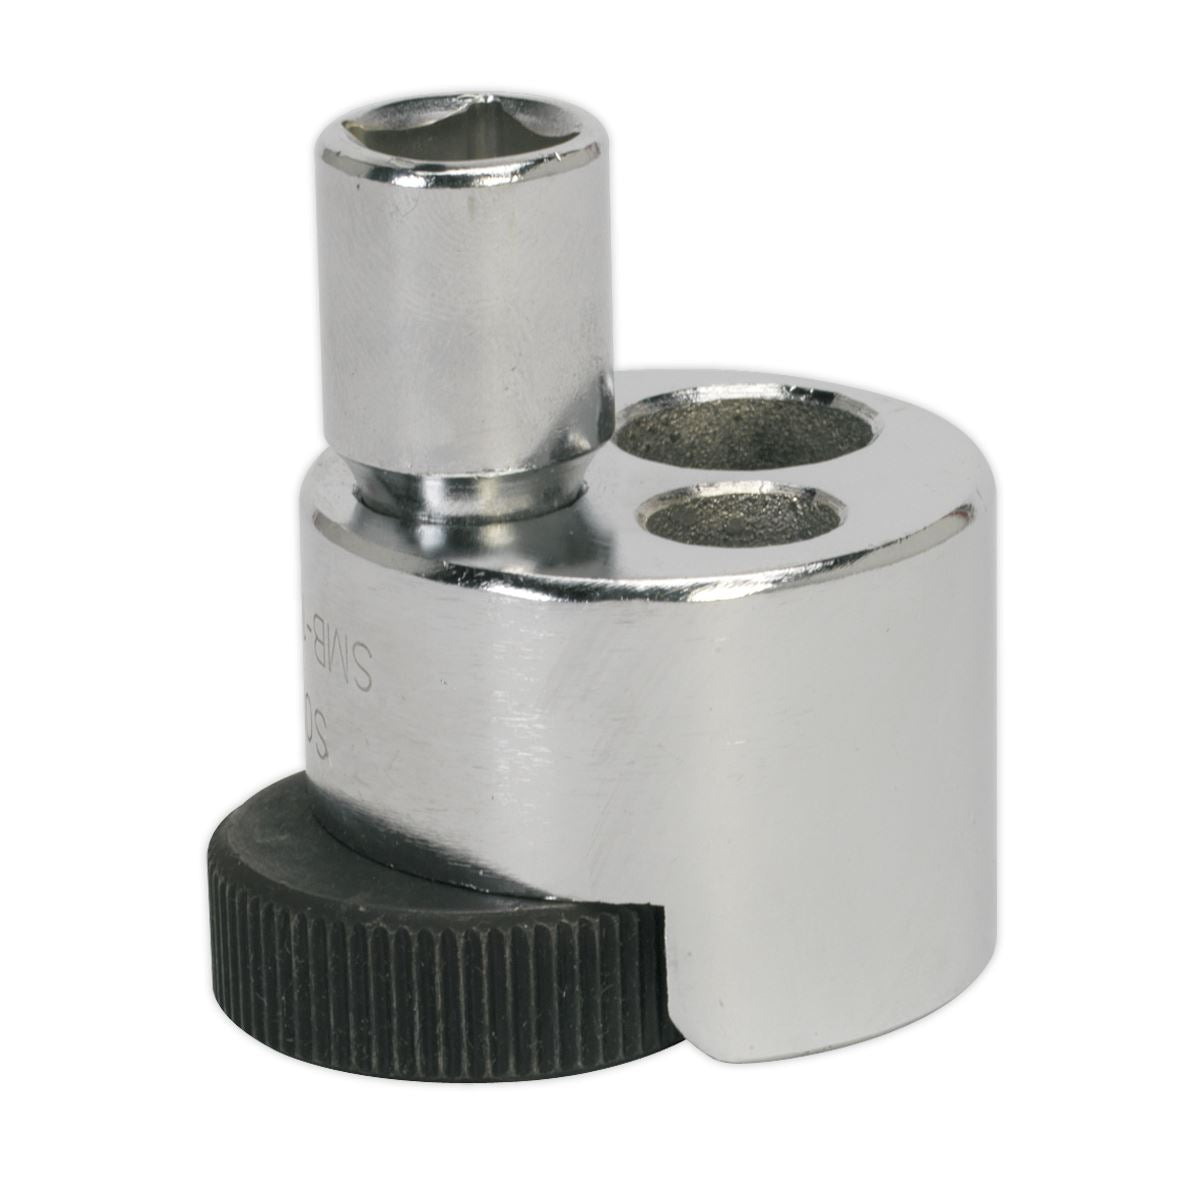 Sealey 8-19mm 1/2" Drive Stud Remover and Installer